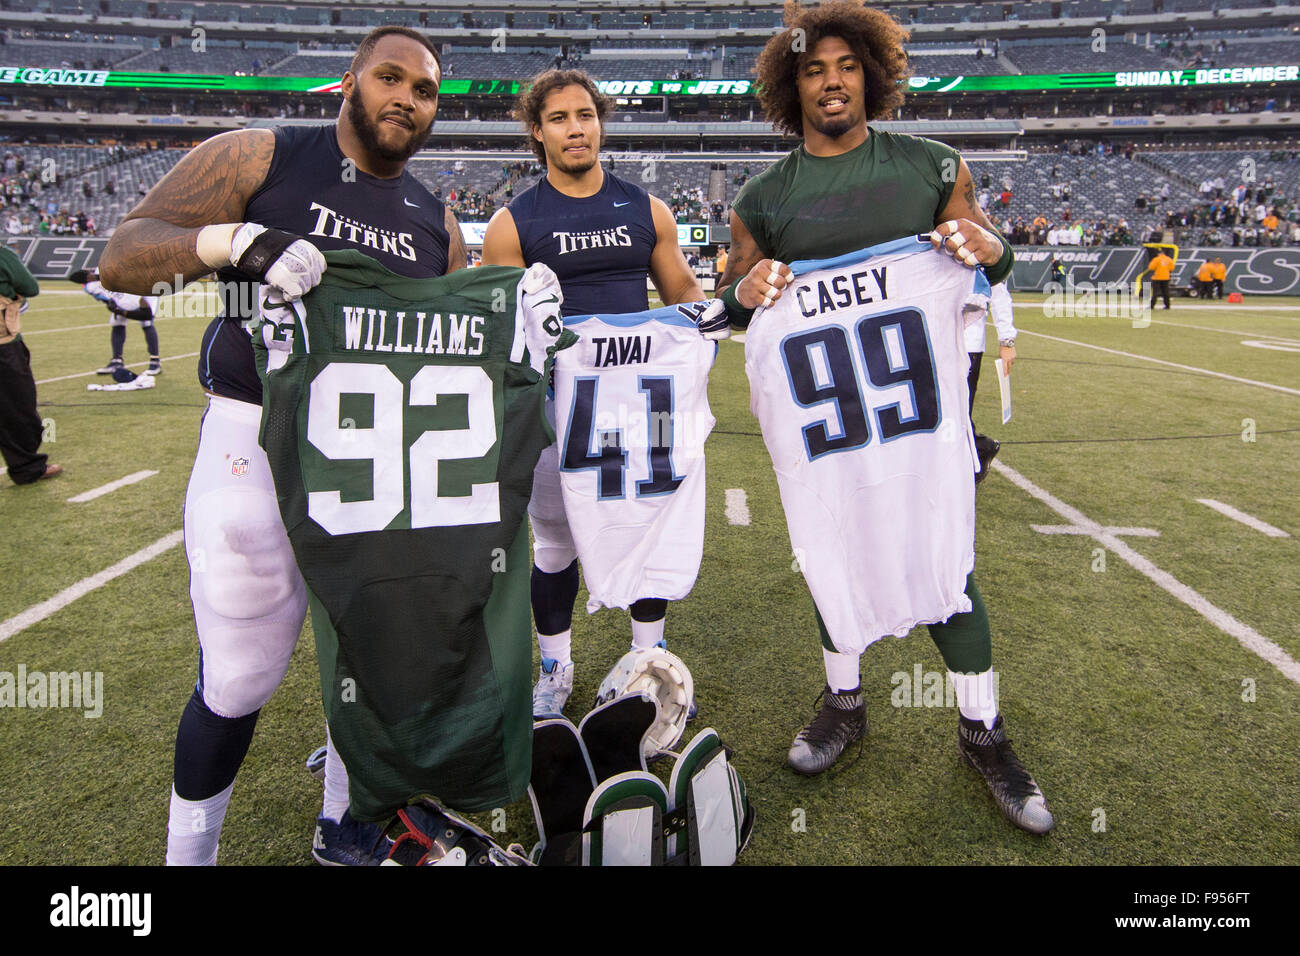 December 13, 2015, New York Jets defensive end Muhammad Wilkerson (96) and  Tennessee Titans defensive end Jurrell Casey (99) exchange jerseys with  linebacker J.R. Tavai (41) by them during the NFL game